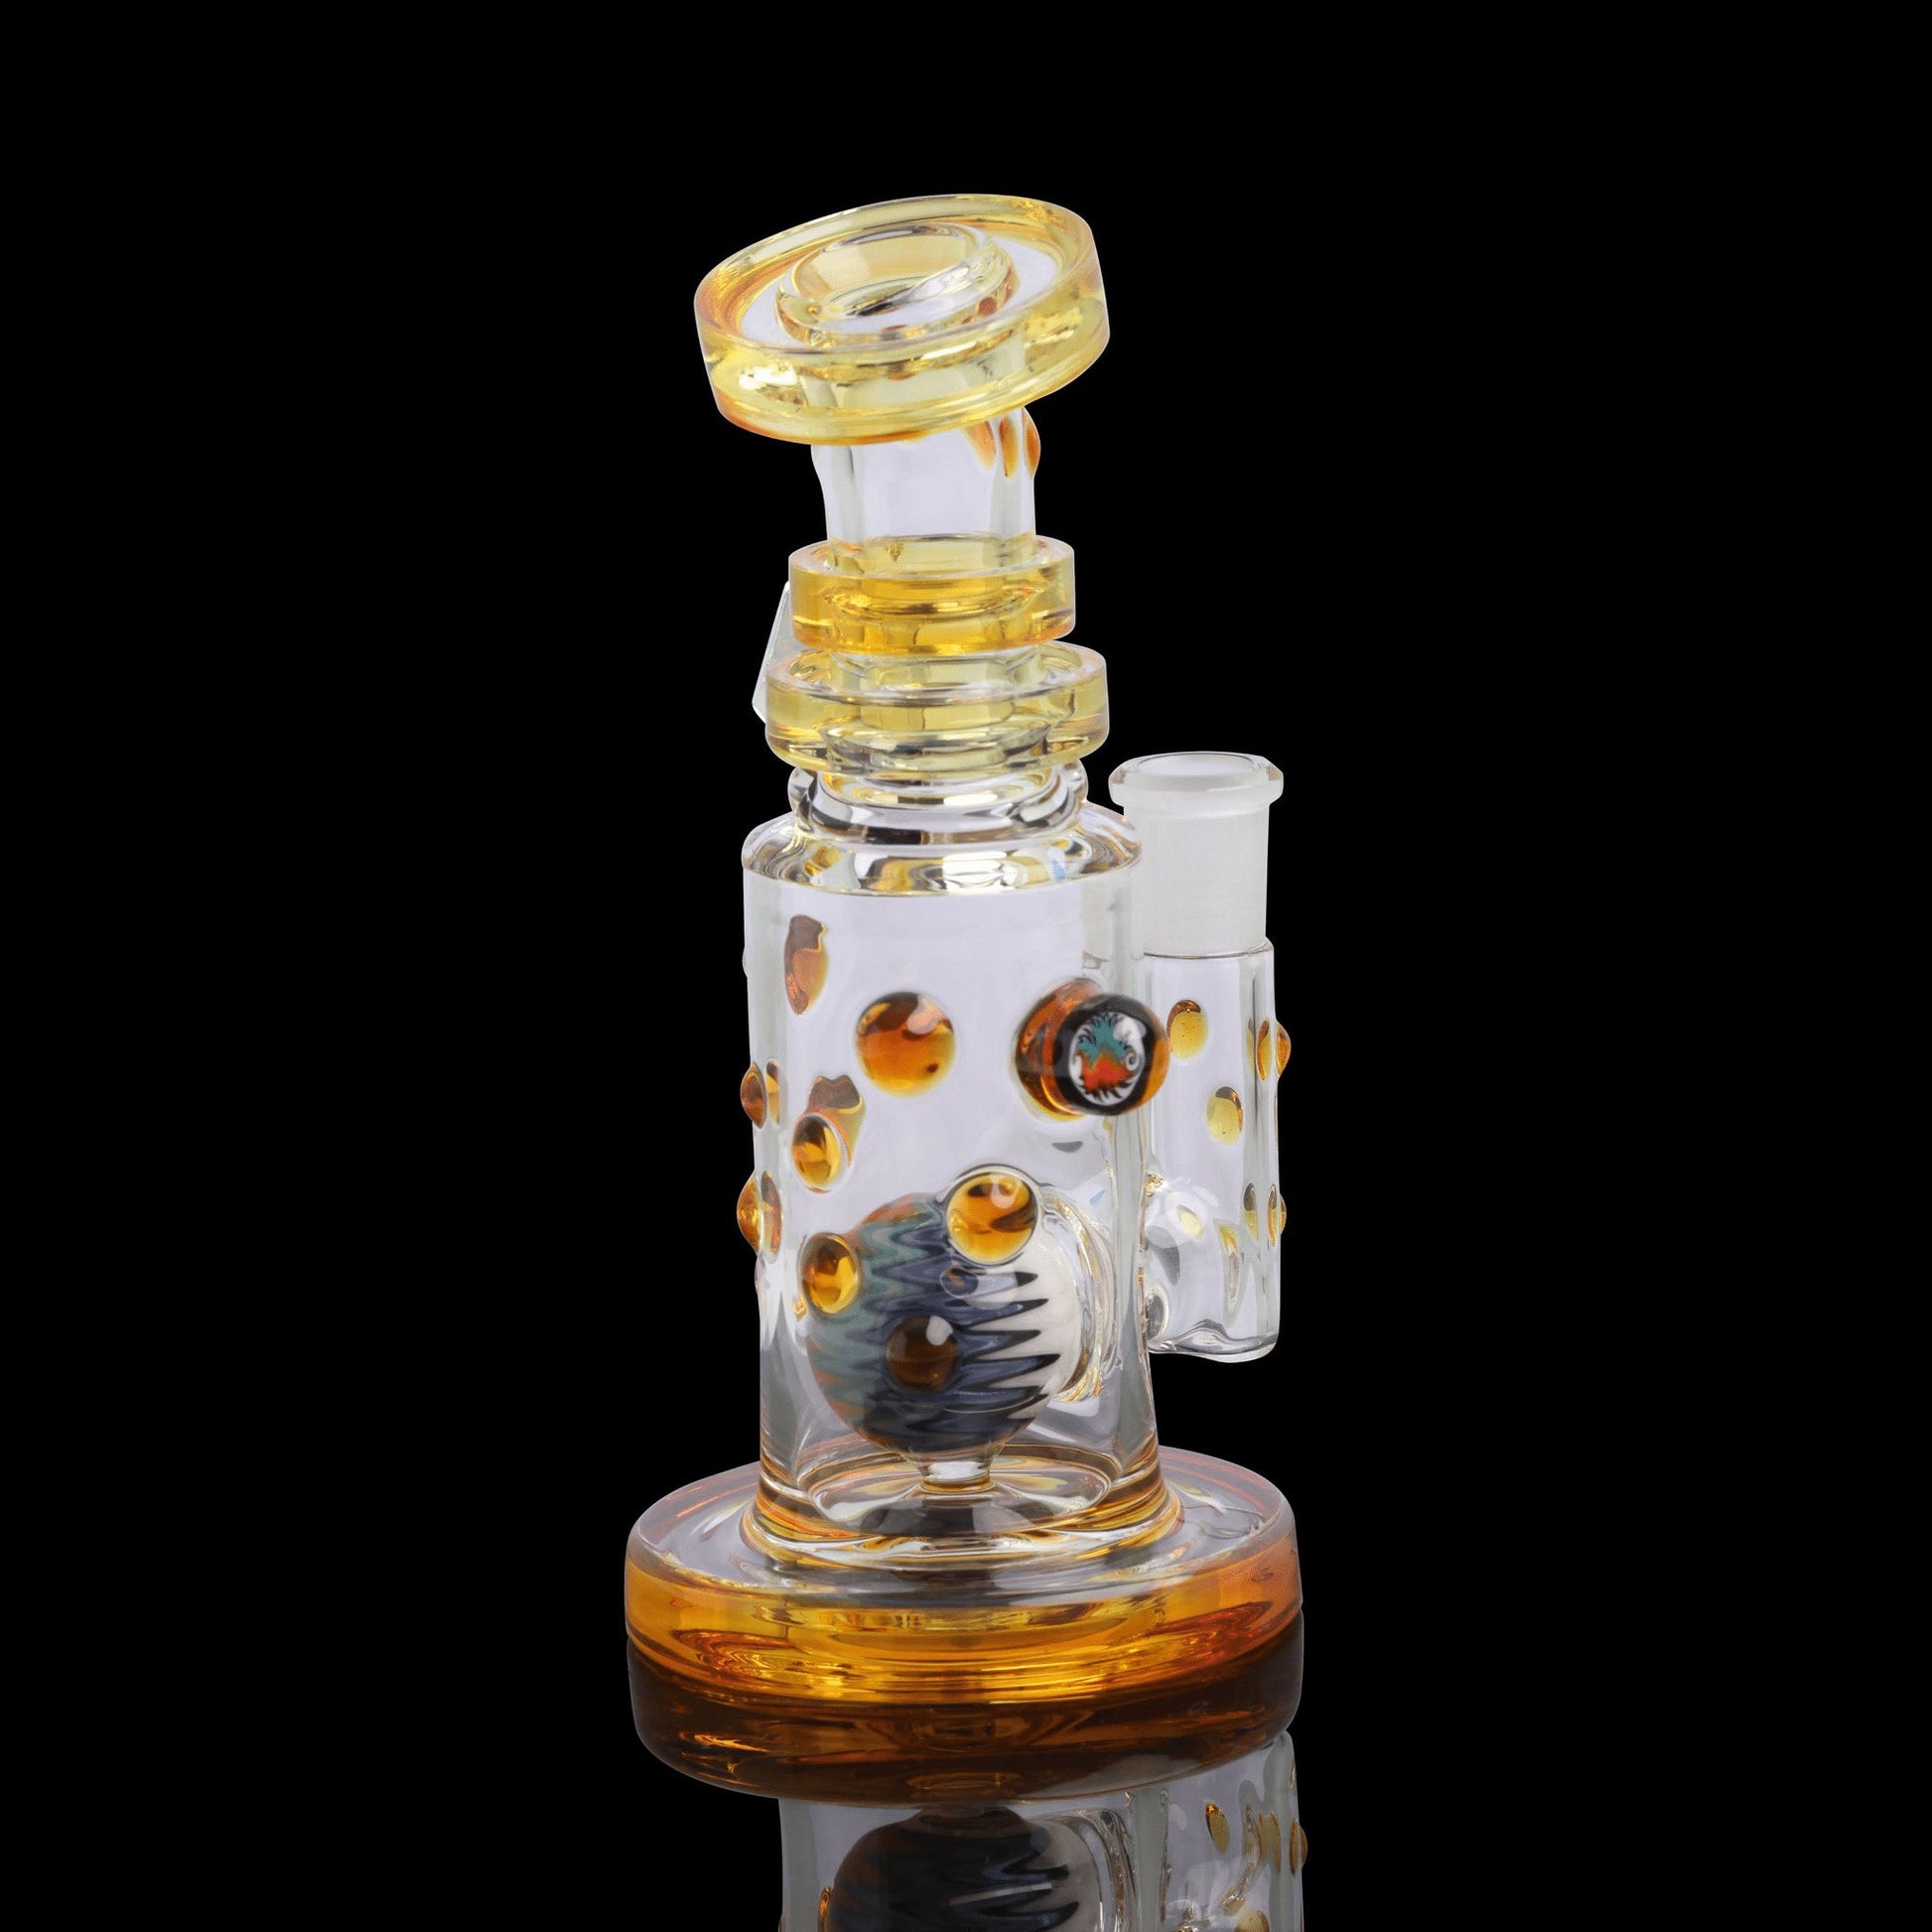 hand-blown design of the Rainbow Rig (A) by Chris Hubbard